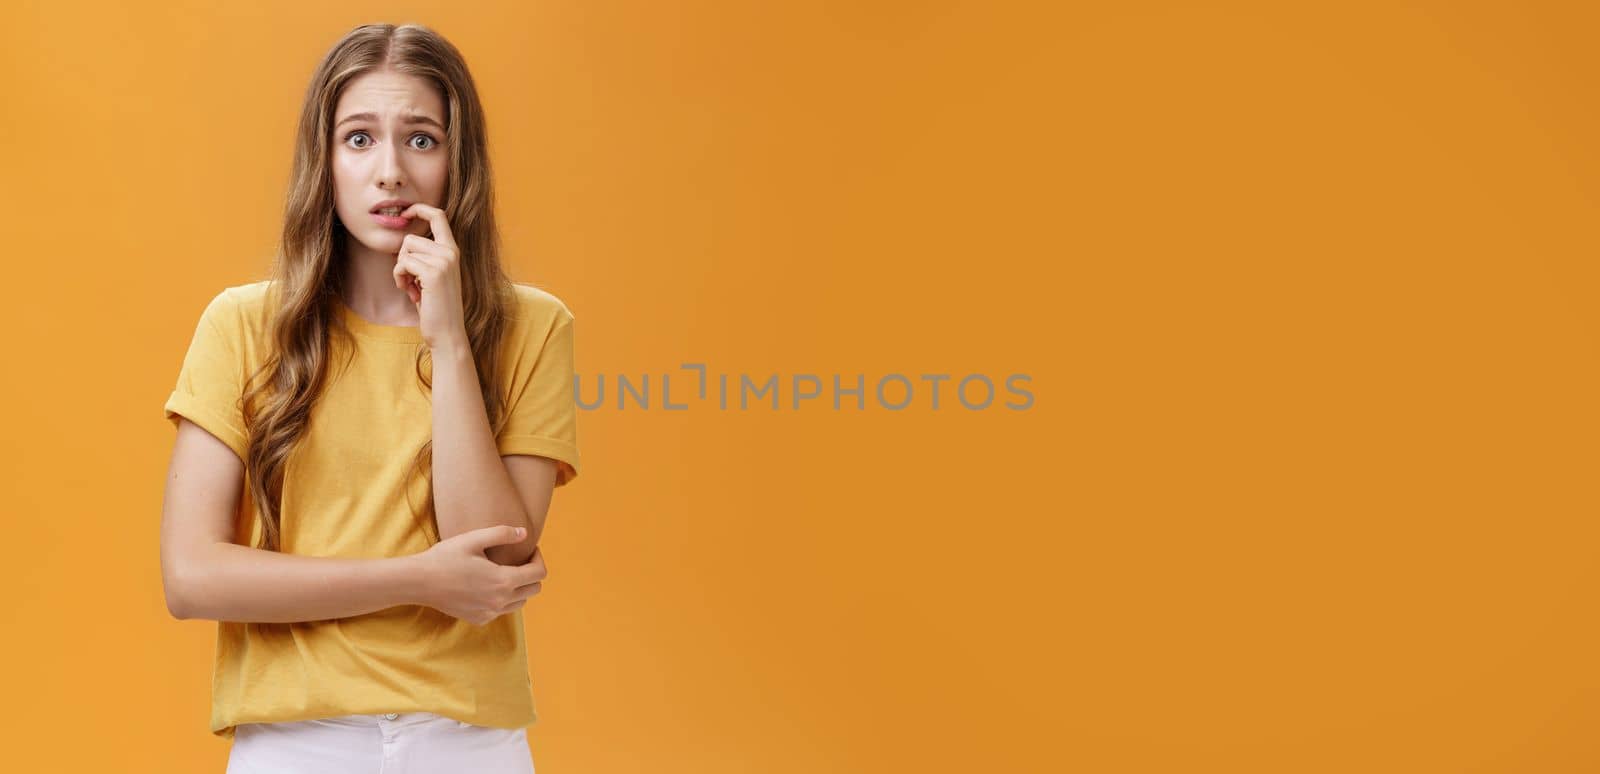 Girl worried mom react on new tattoo. Portrait of anxious and nervous silly insecure young female with wavy natural hairstyle biting finger panicking looking concerned and troubled over orange wall. Emotions concept